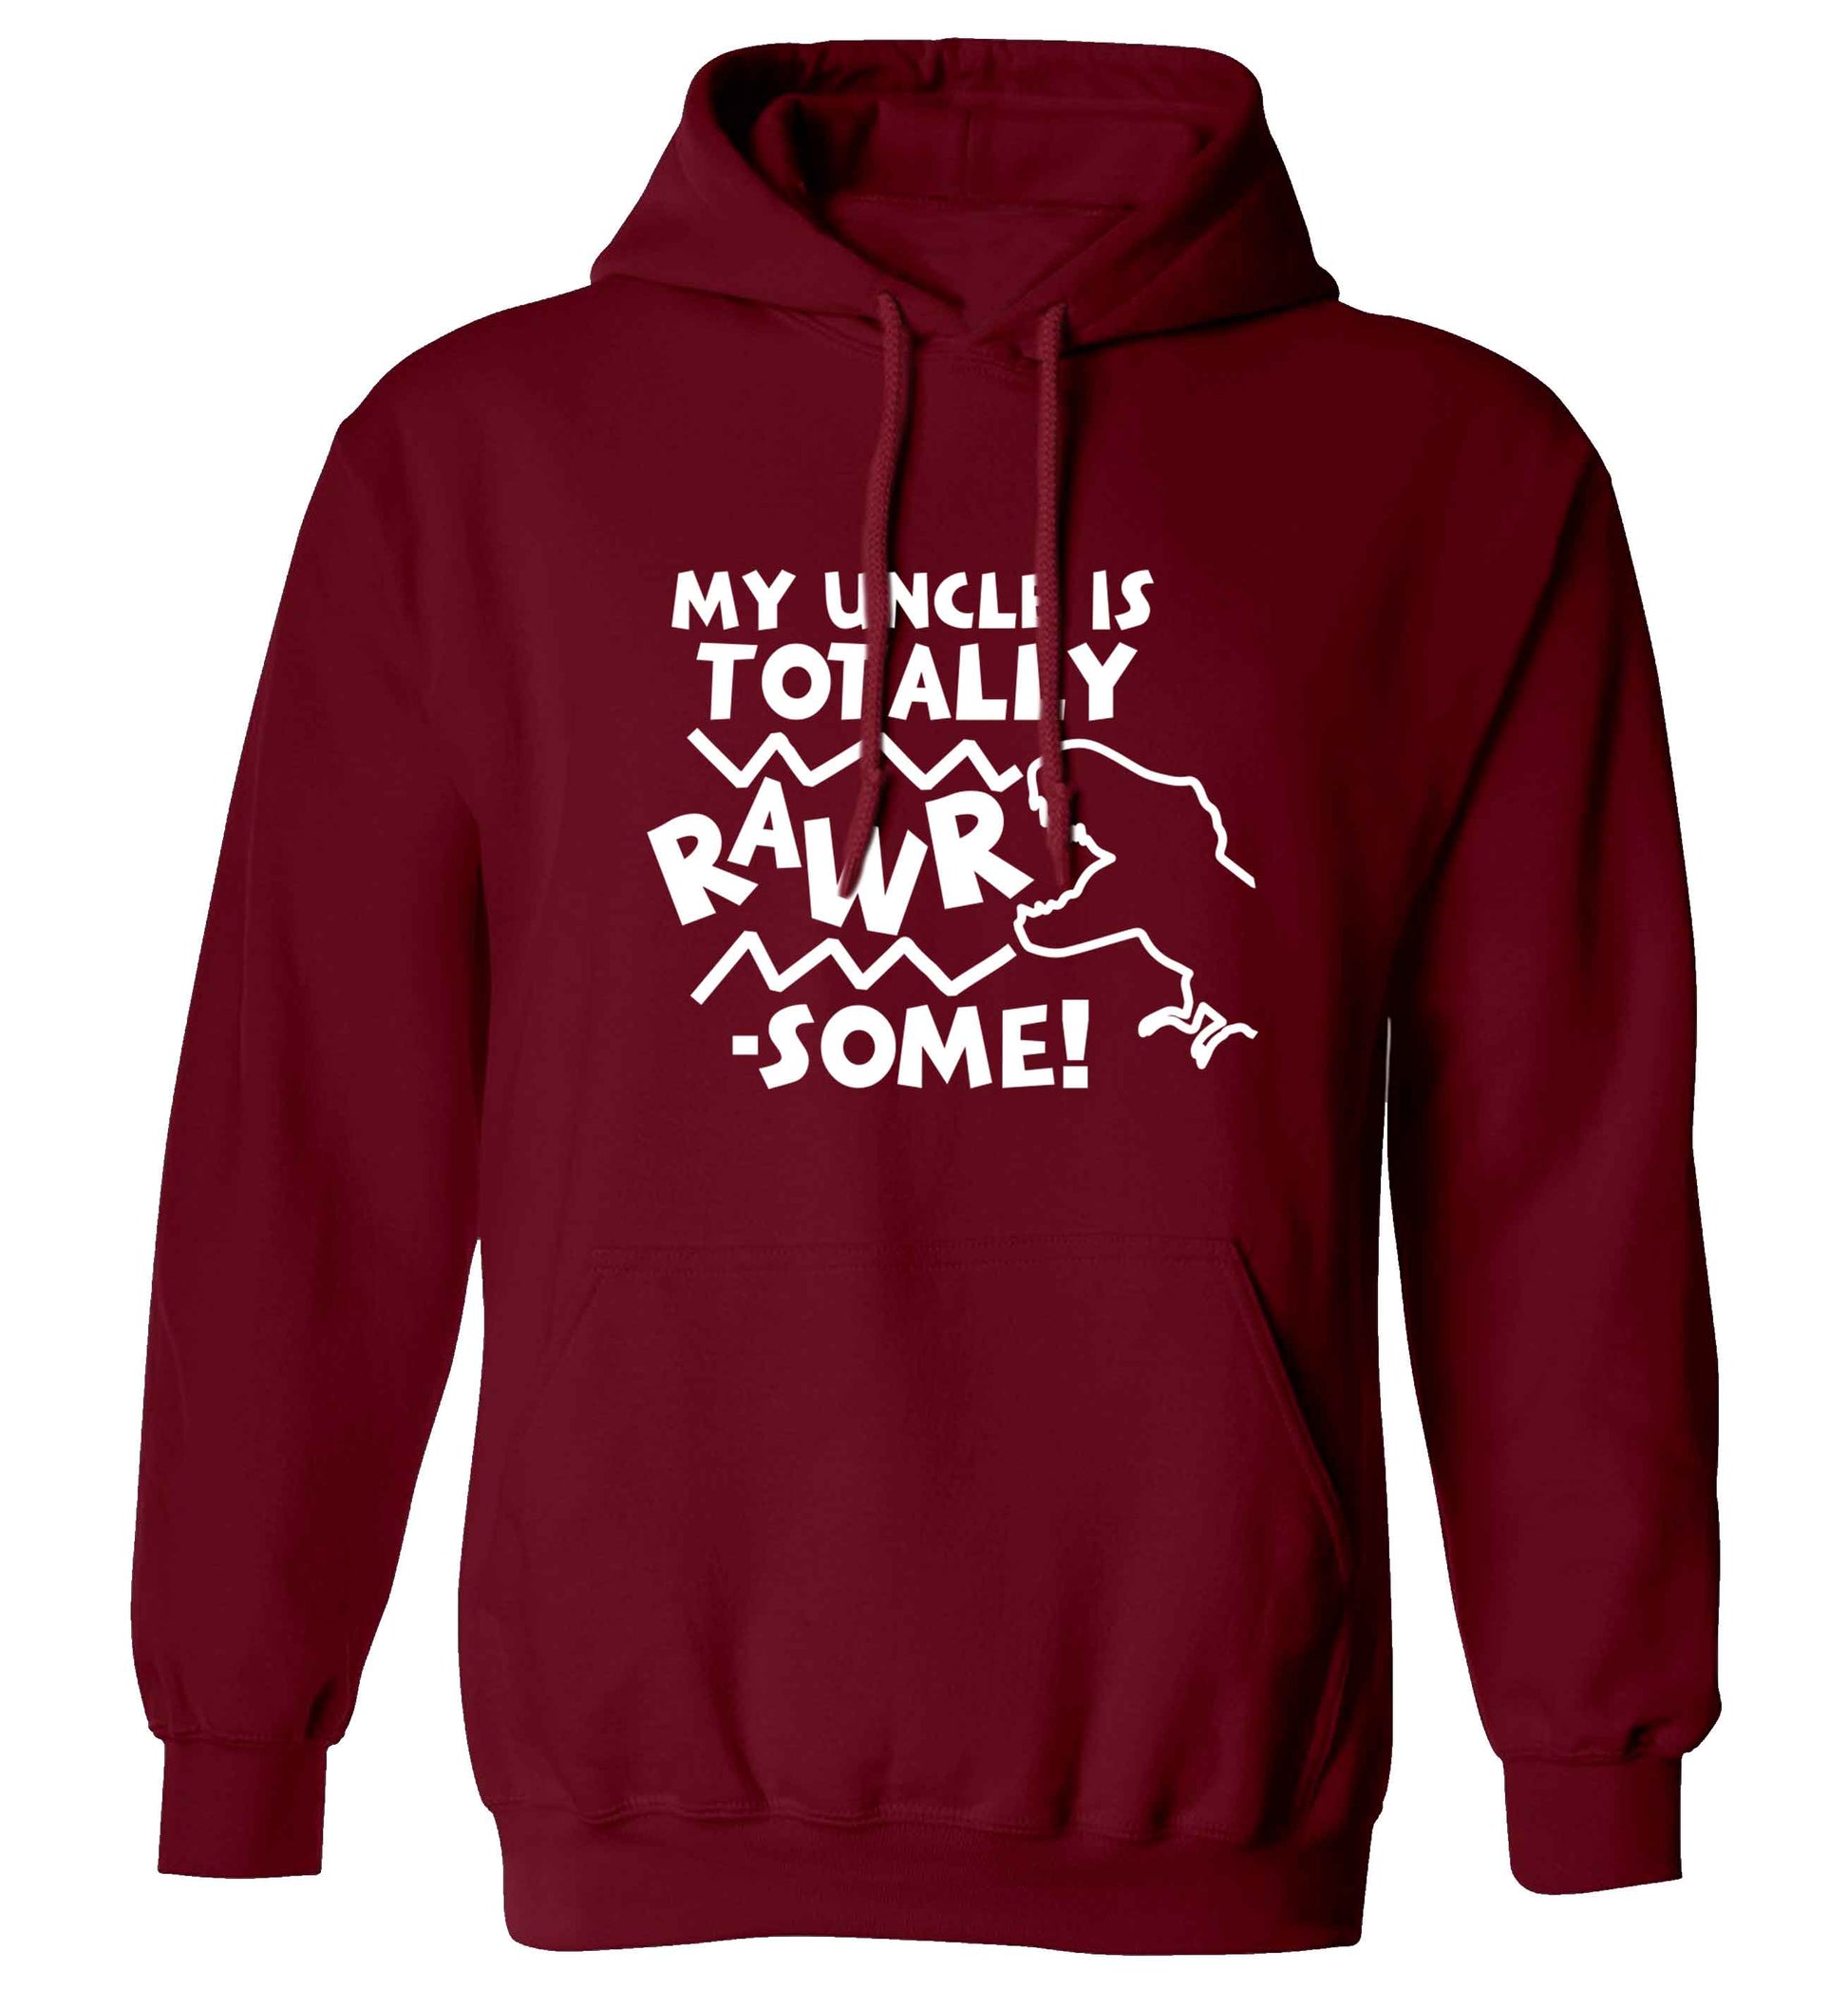 My uncle is totally rawrsome adults unisex maroon hoodie 2XL